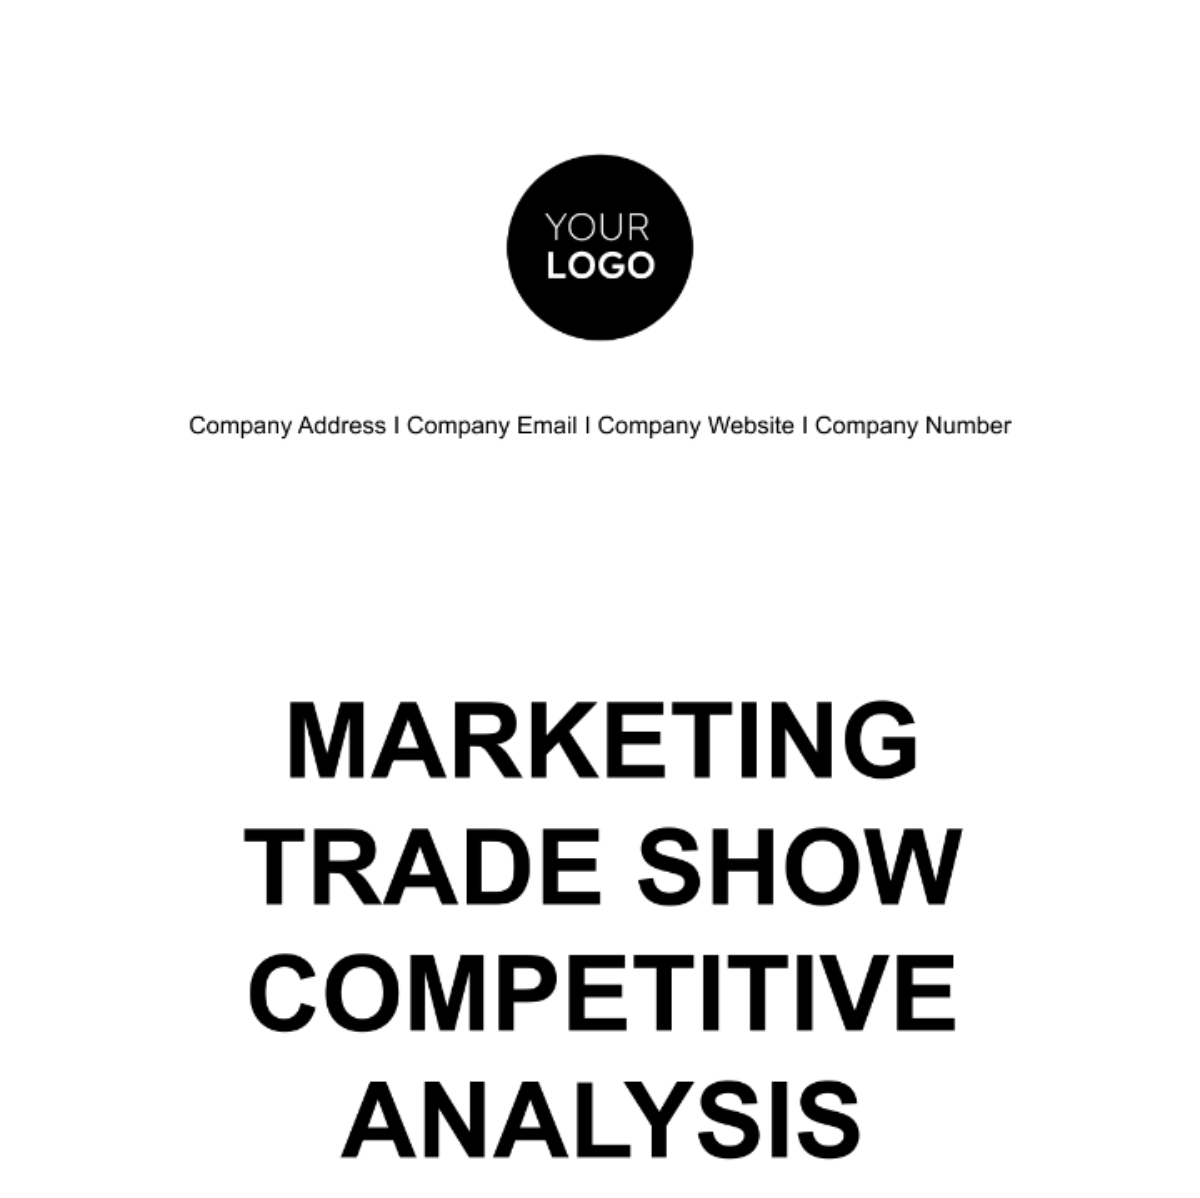 Marketing Trade Show Competitive Analysis Template